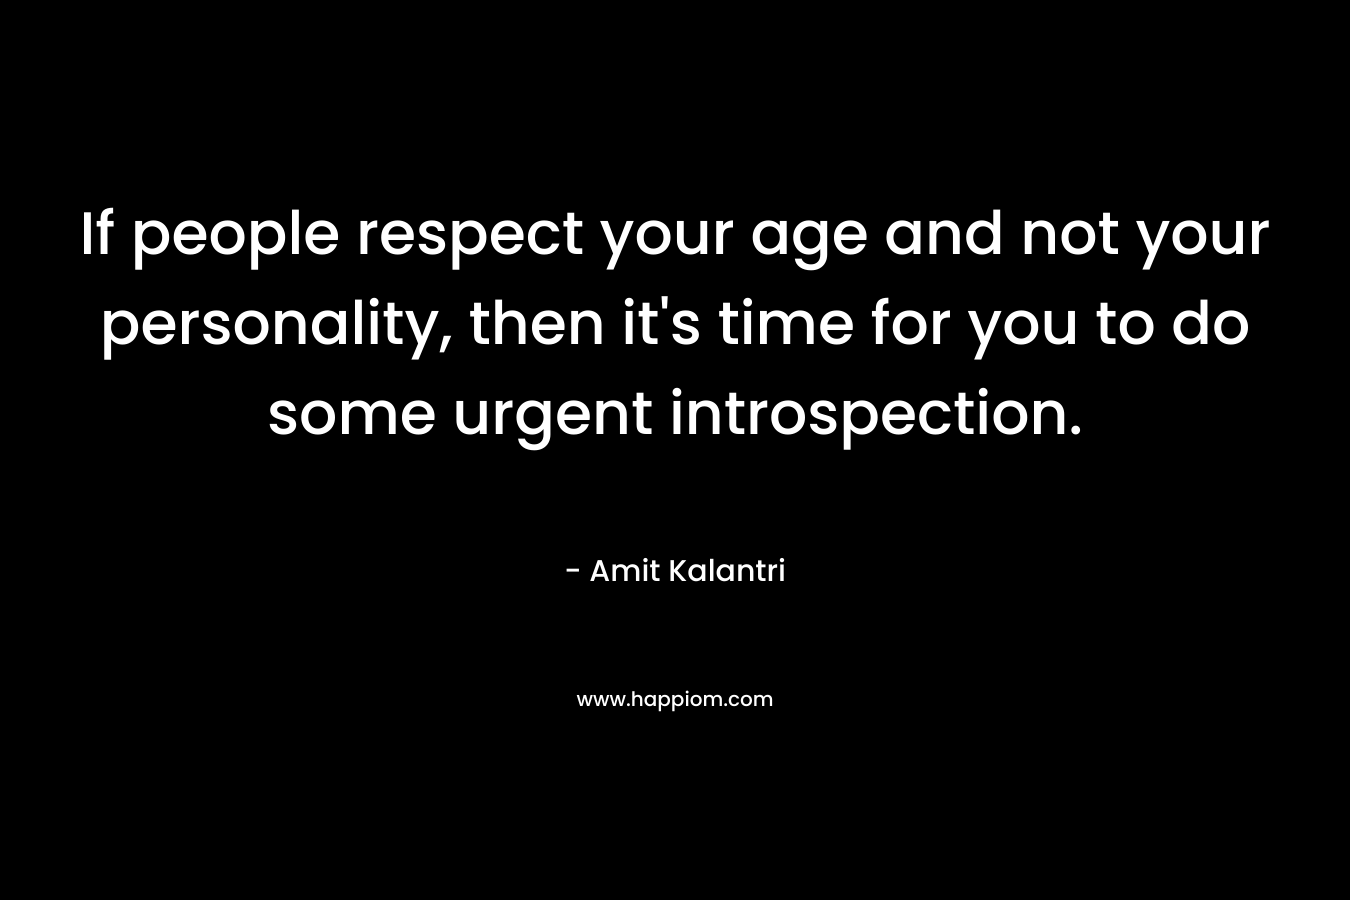 If people respect your age and not your personality, then it’s time for you to do some urgent introspection. – Amit Kalantri